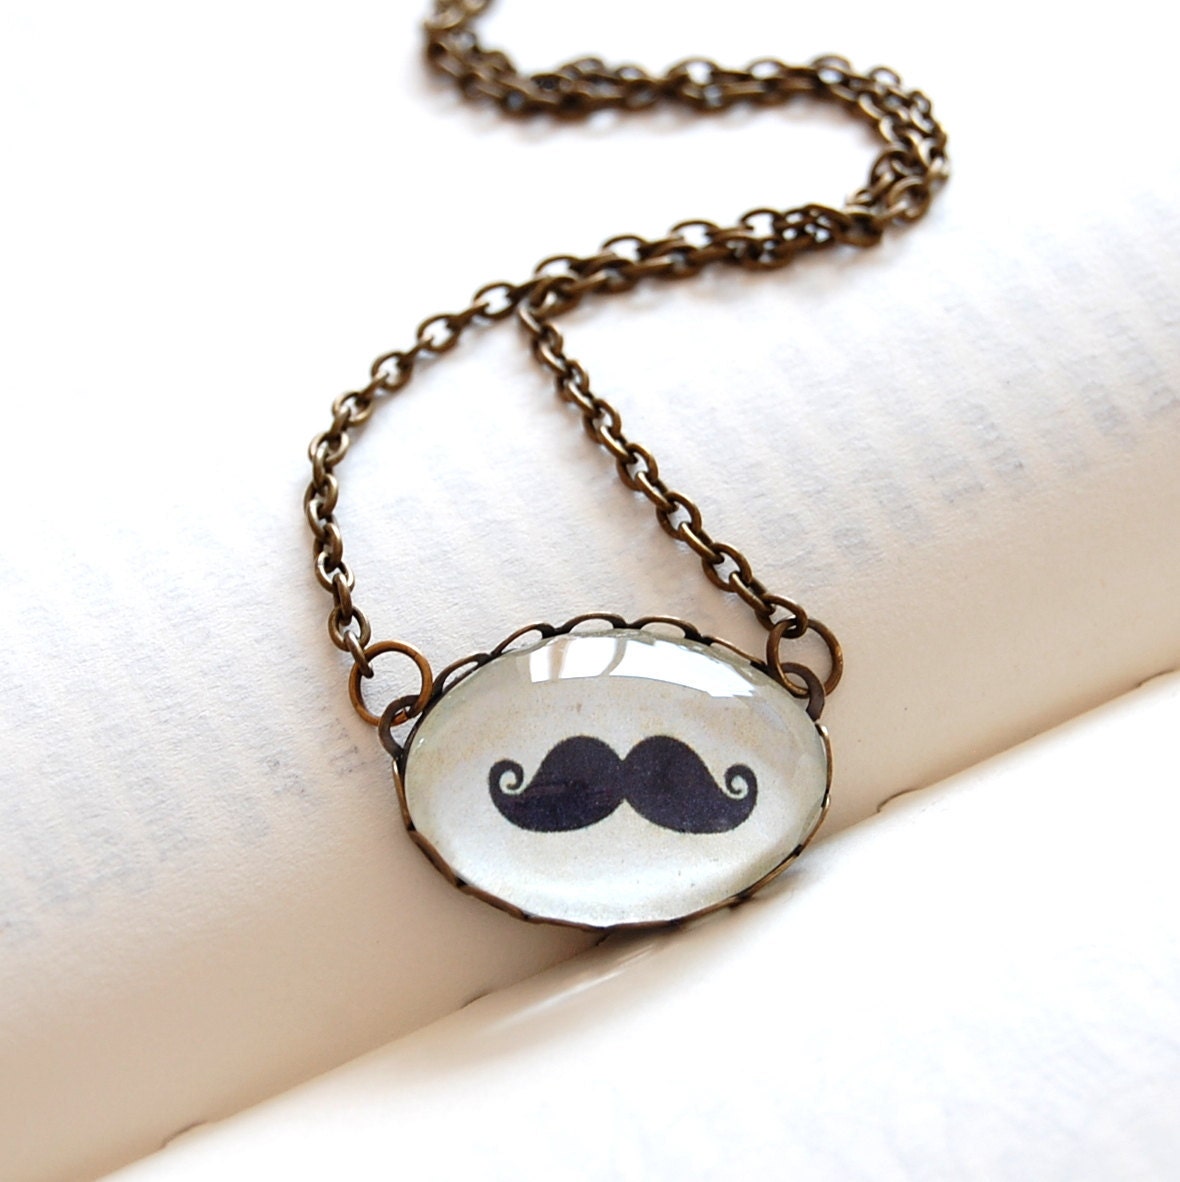 Mustache Necklace. Antique Brass and Glass Dome. Curly Mustache, Geekery...